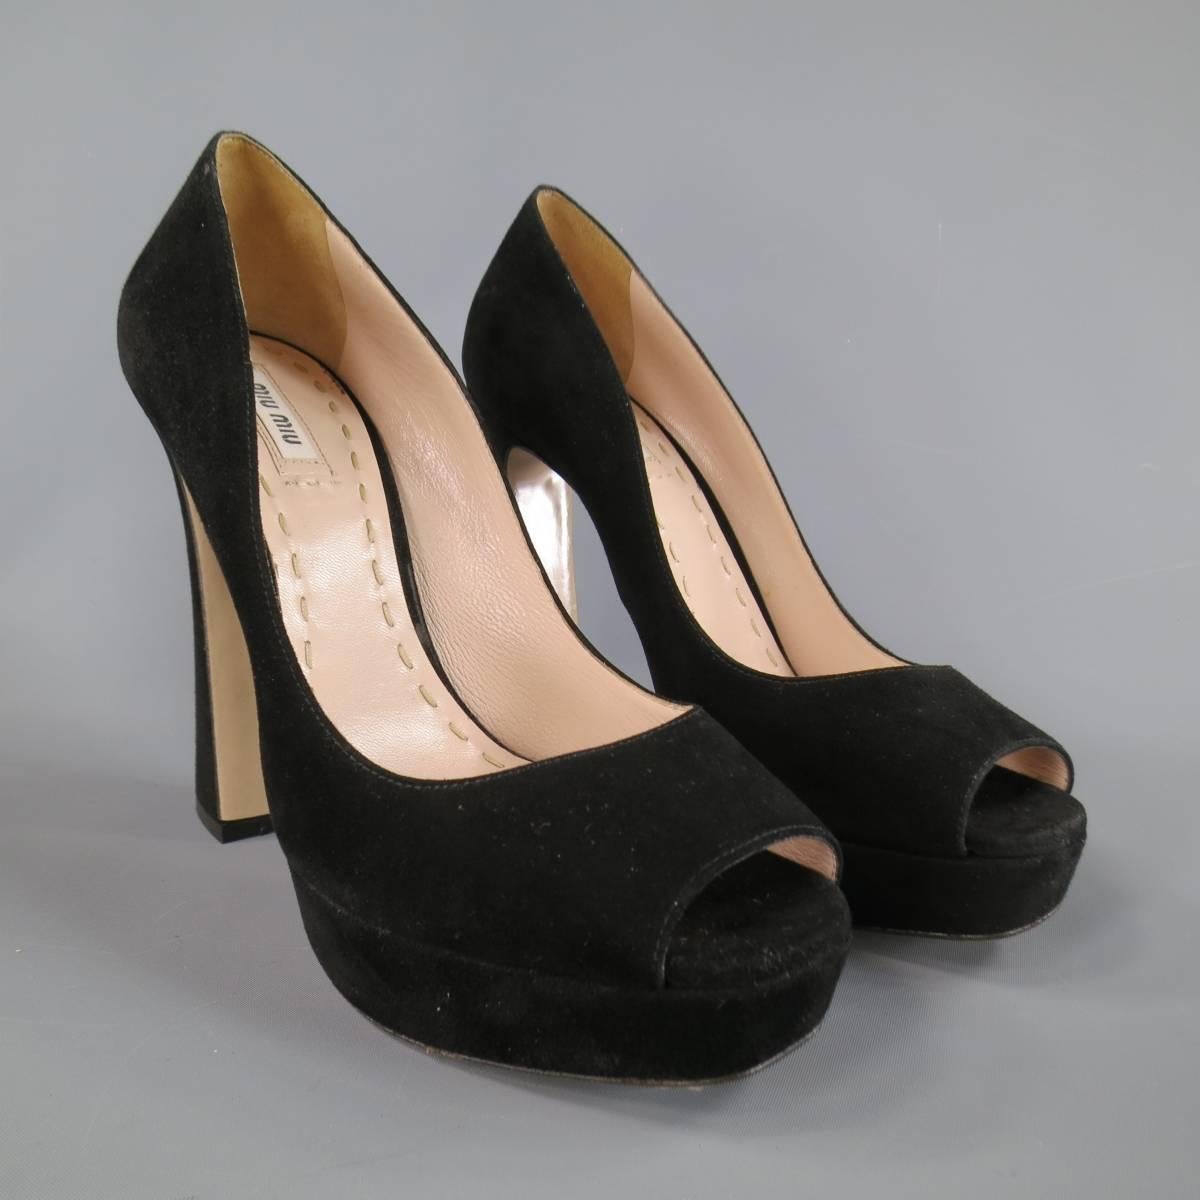 MIU MIU platform pumps in black suede featuring a square peep toe, and thick covered heel. Made in Italy.
Retails at $595.00.
 
New without Tags.
 
Platform: 1 in.
Heel: 5.1 in.